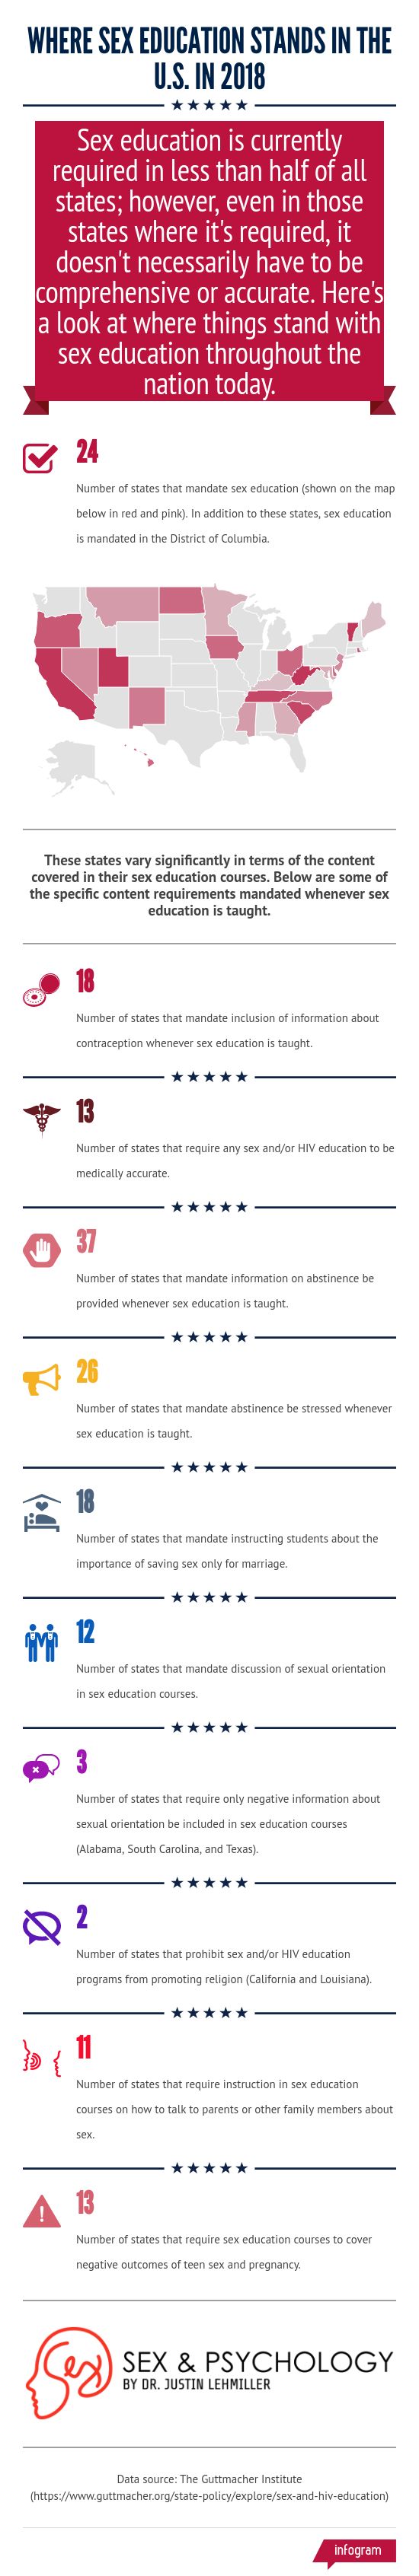 Sex-education-united-states-2018-infographic.jpg